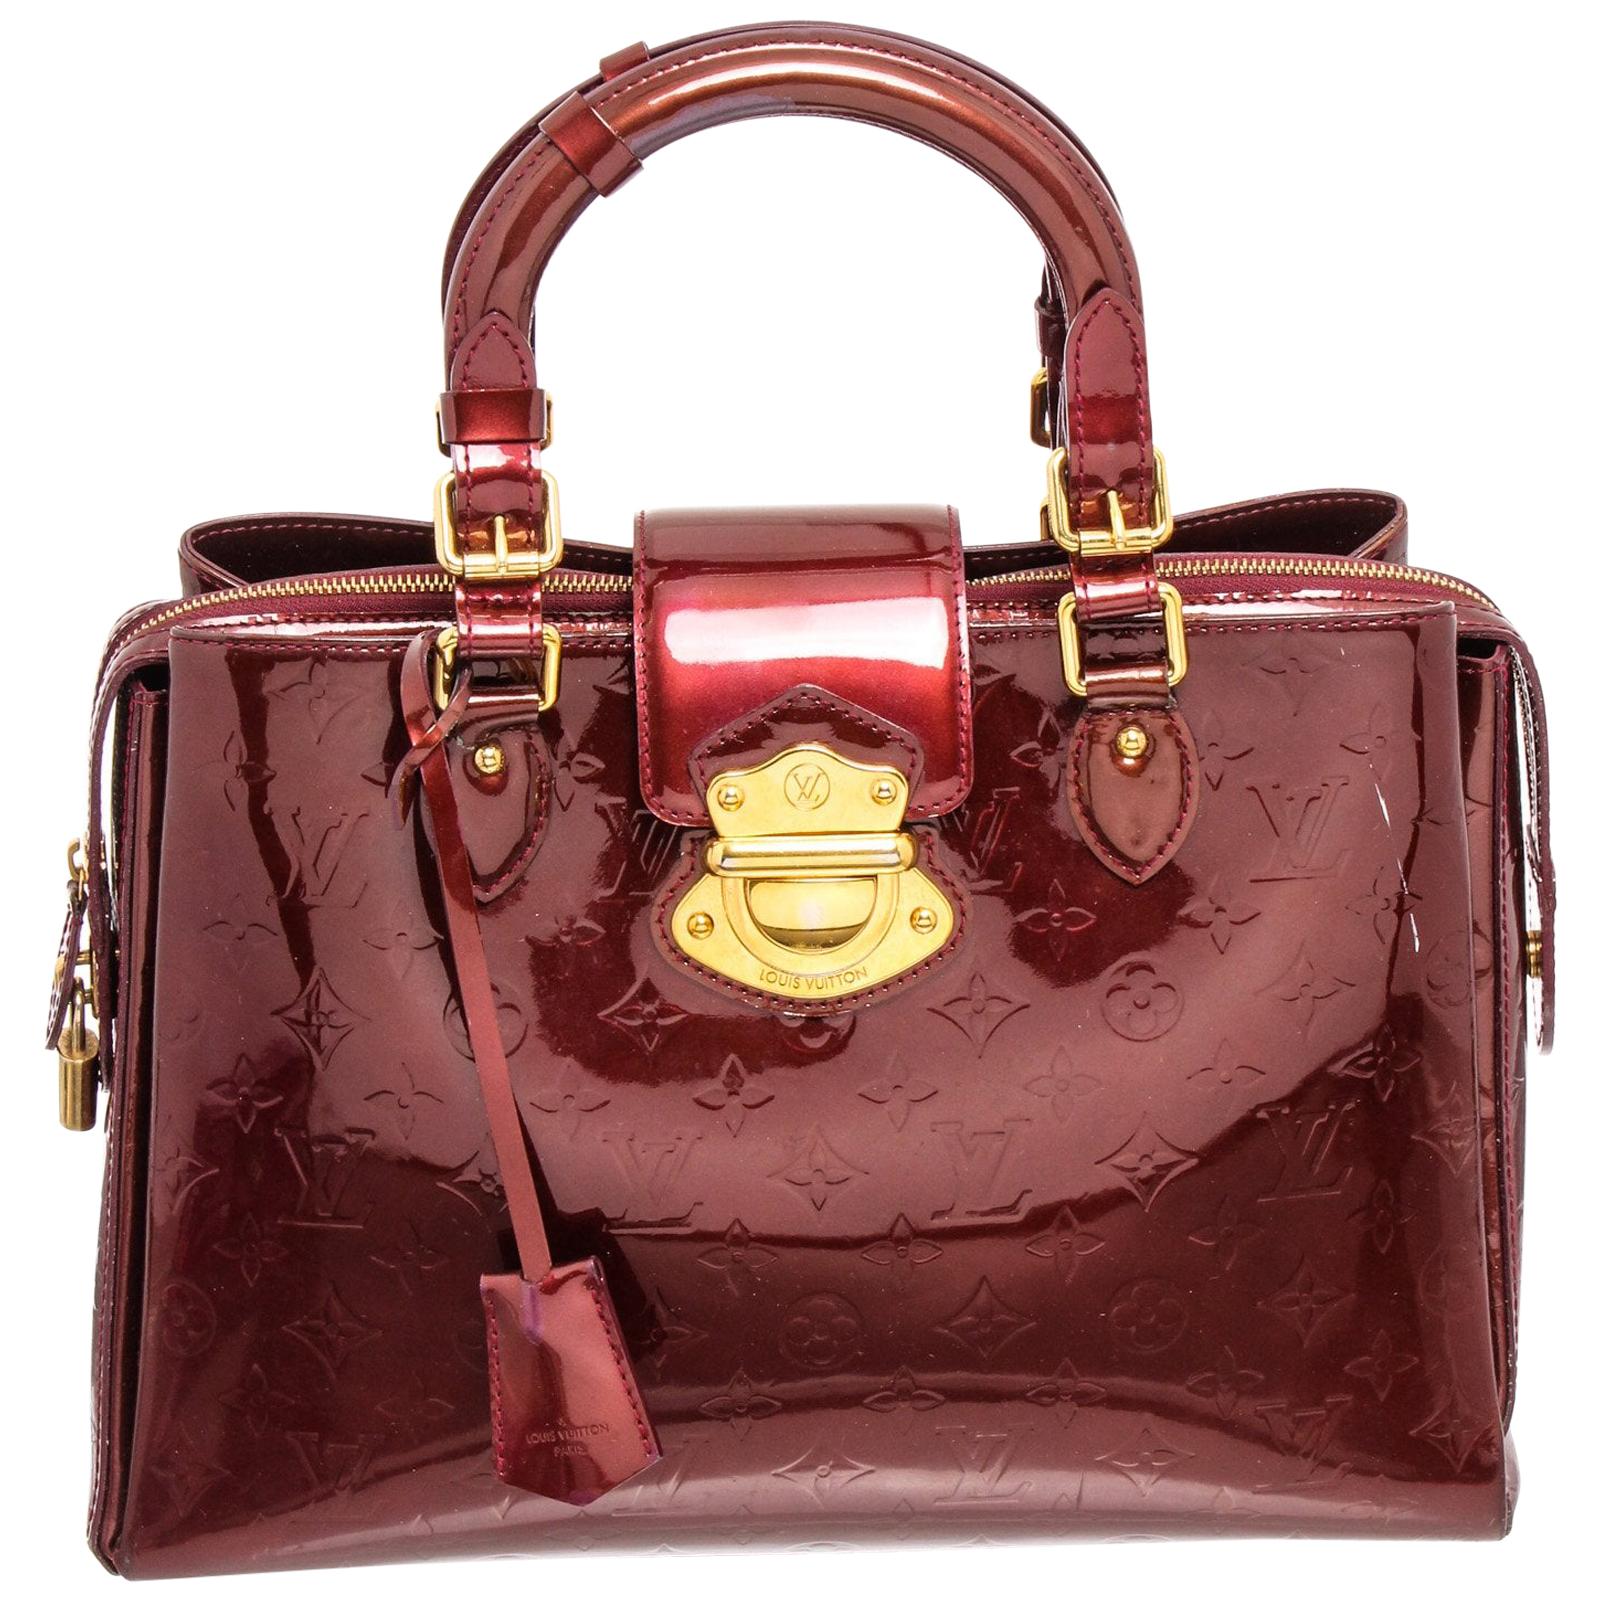 Louis Vuitton Red Vernis Leather Melrose Avenue